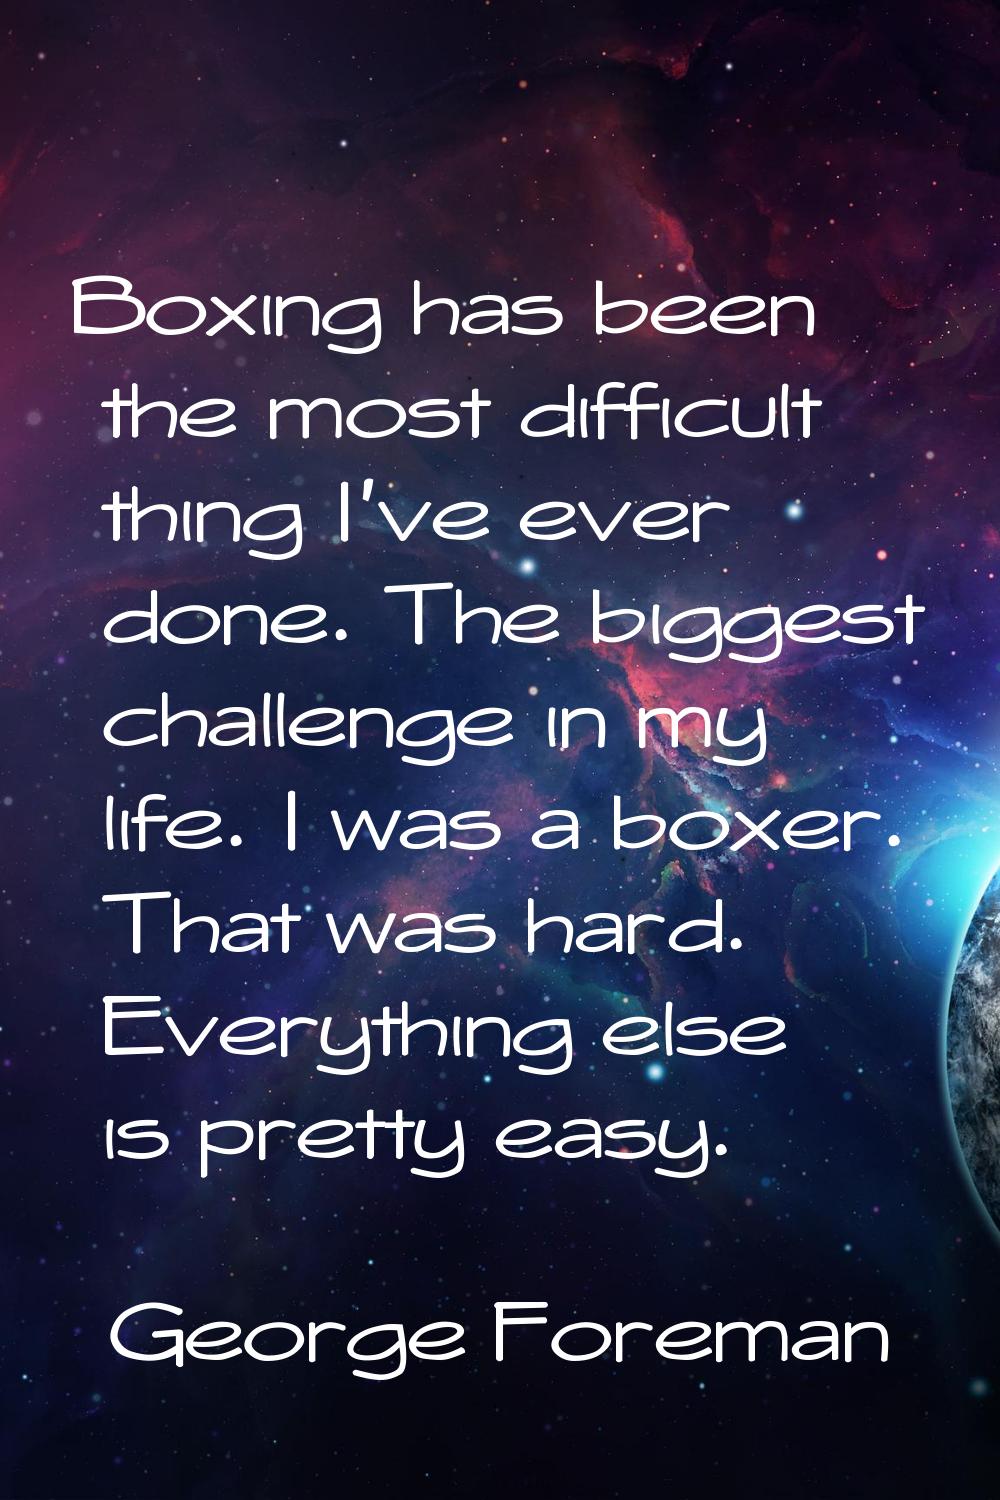 Boxing has been the most difficult thing I've ever done. The biggest challenge in my life. I was a 